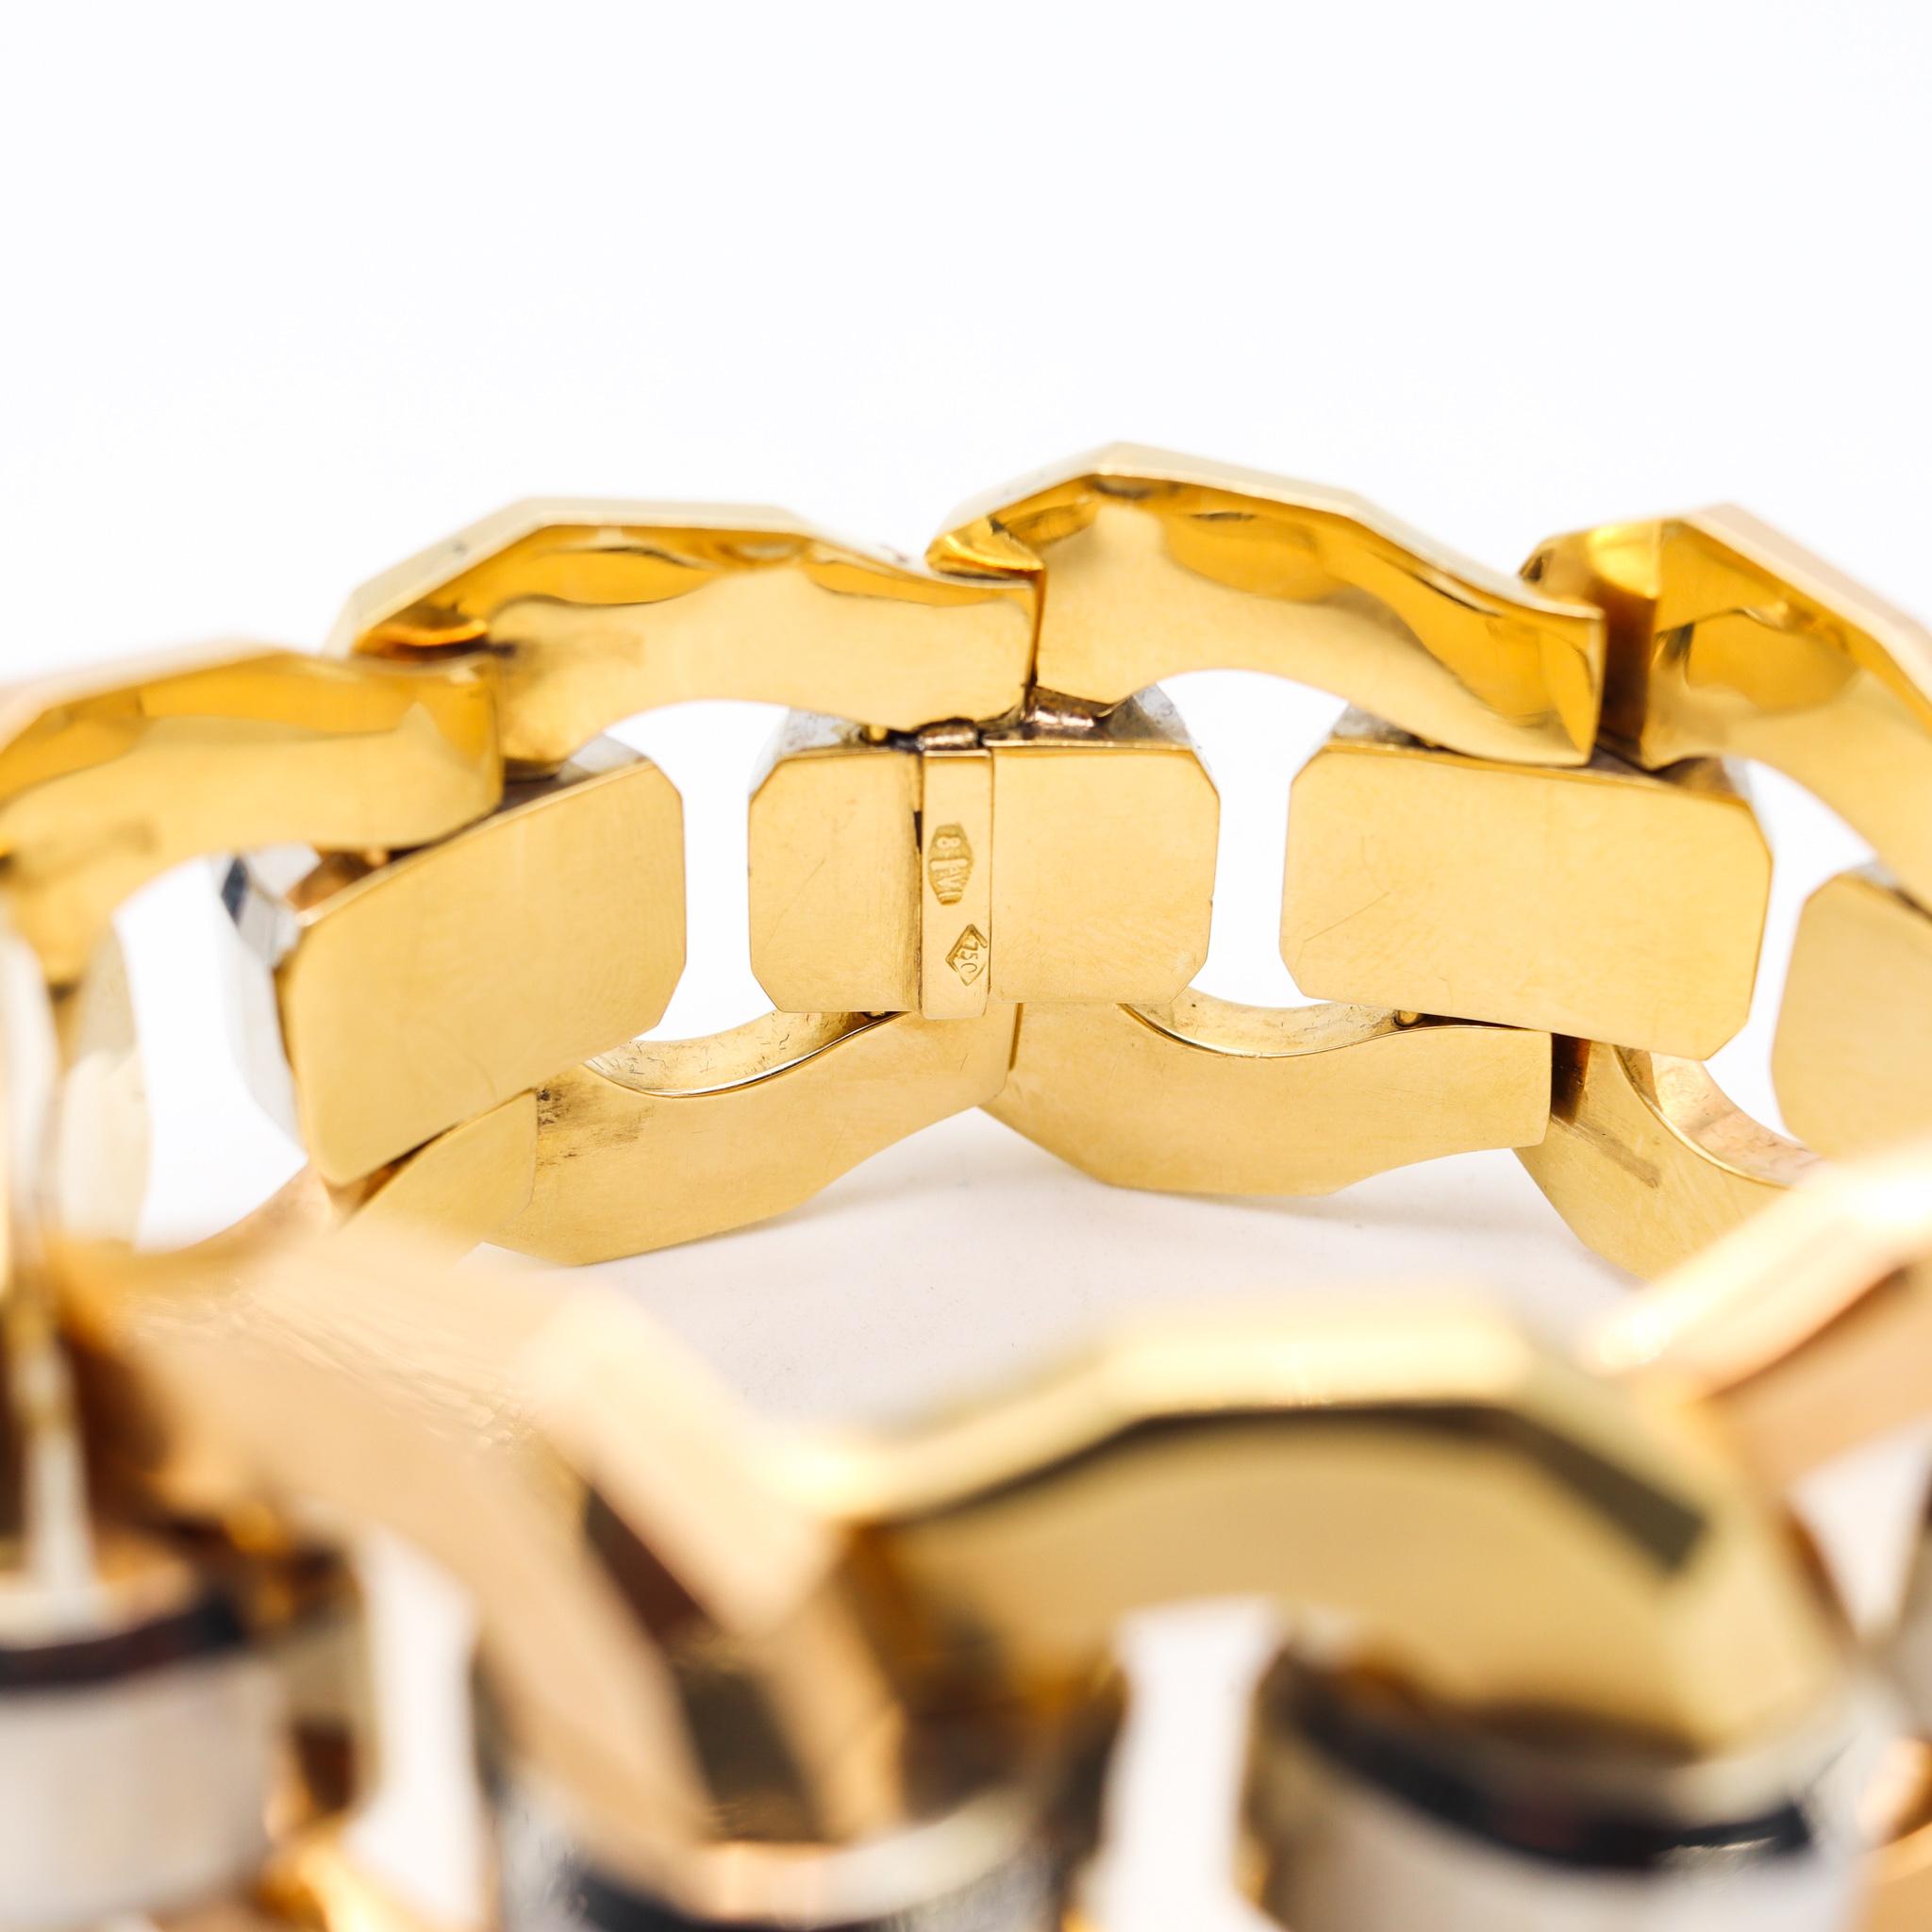 Italy, 1930, Art Deco Rare Bold Tank Bracelet in Two Tones of Faceted 18Kt Gold 2